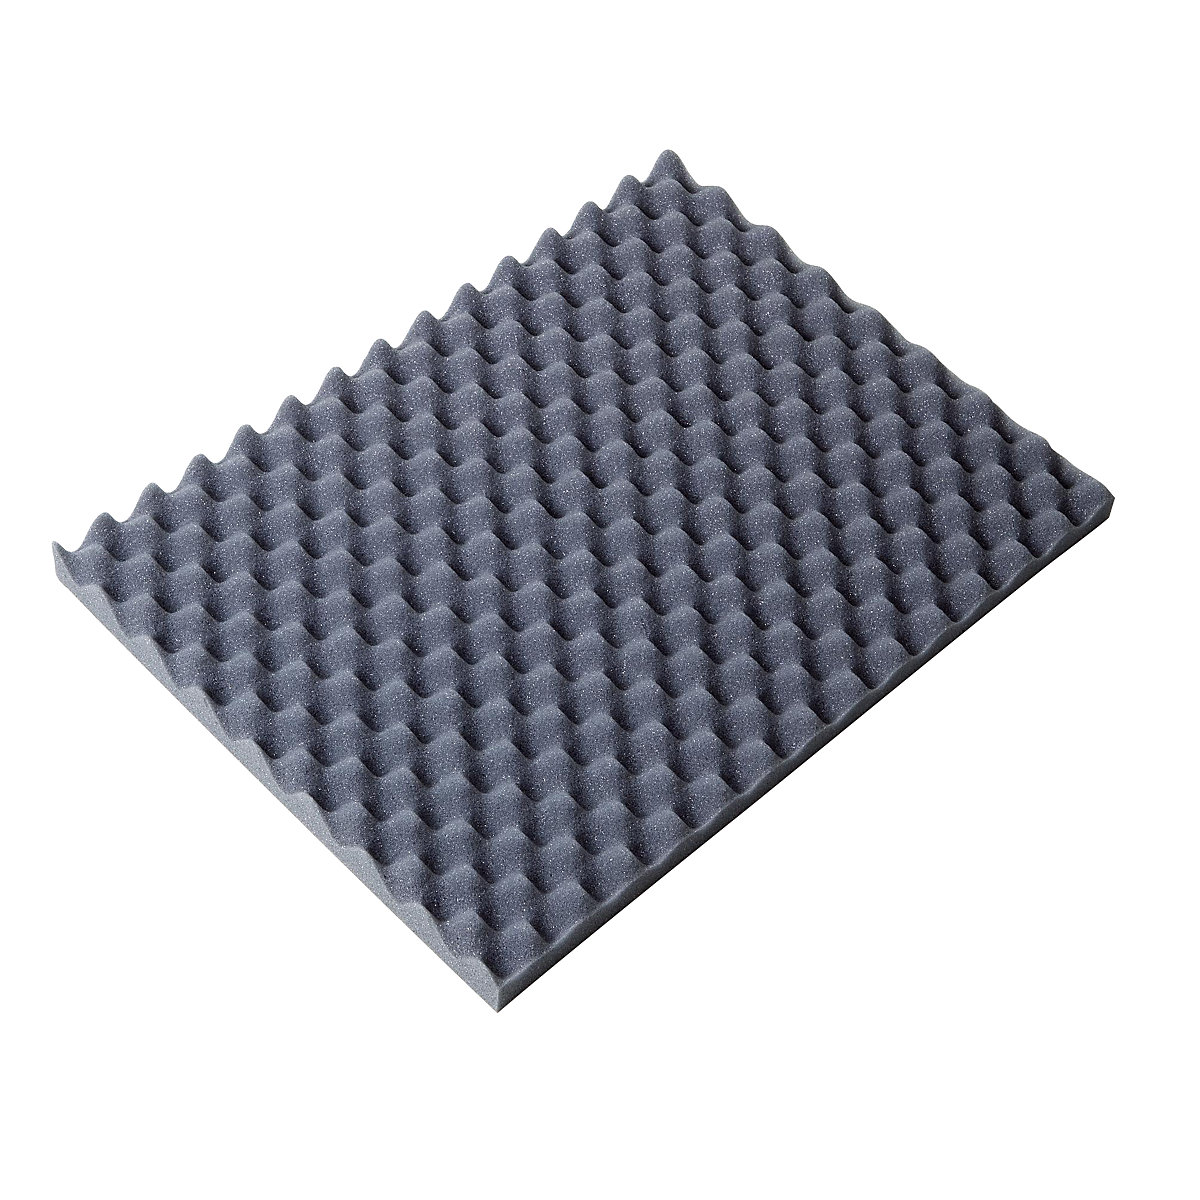 Egg crate foam sheet, 30 mm thick, LxW 400 x 300 mm, pack of 26, 3+ packs-6